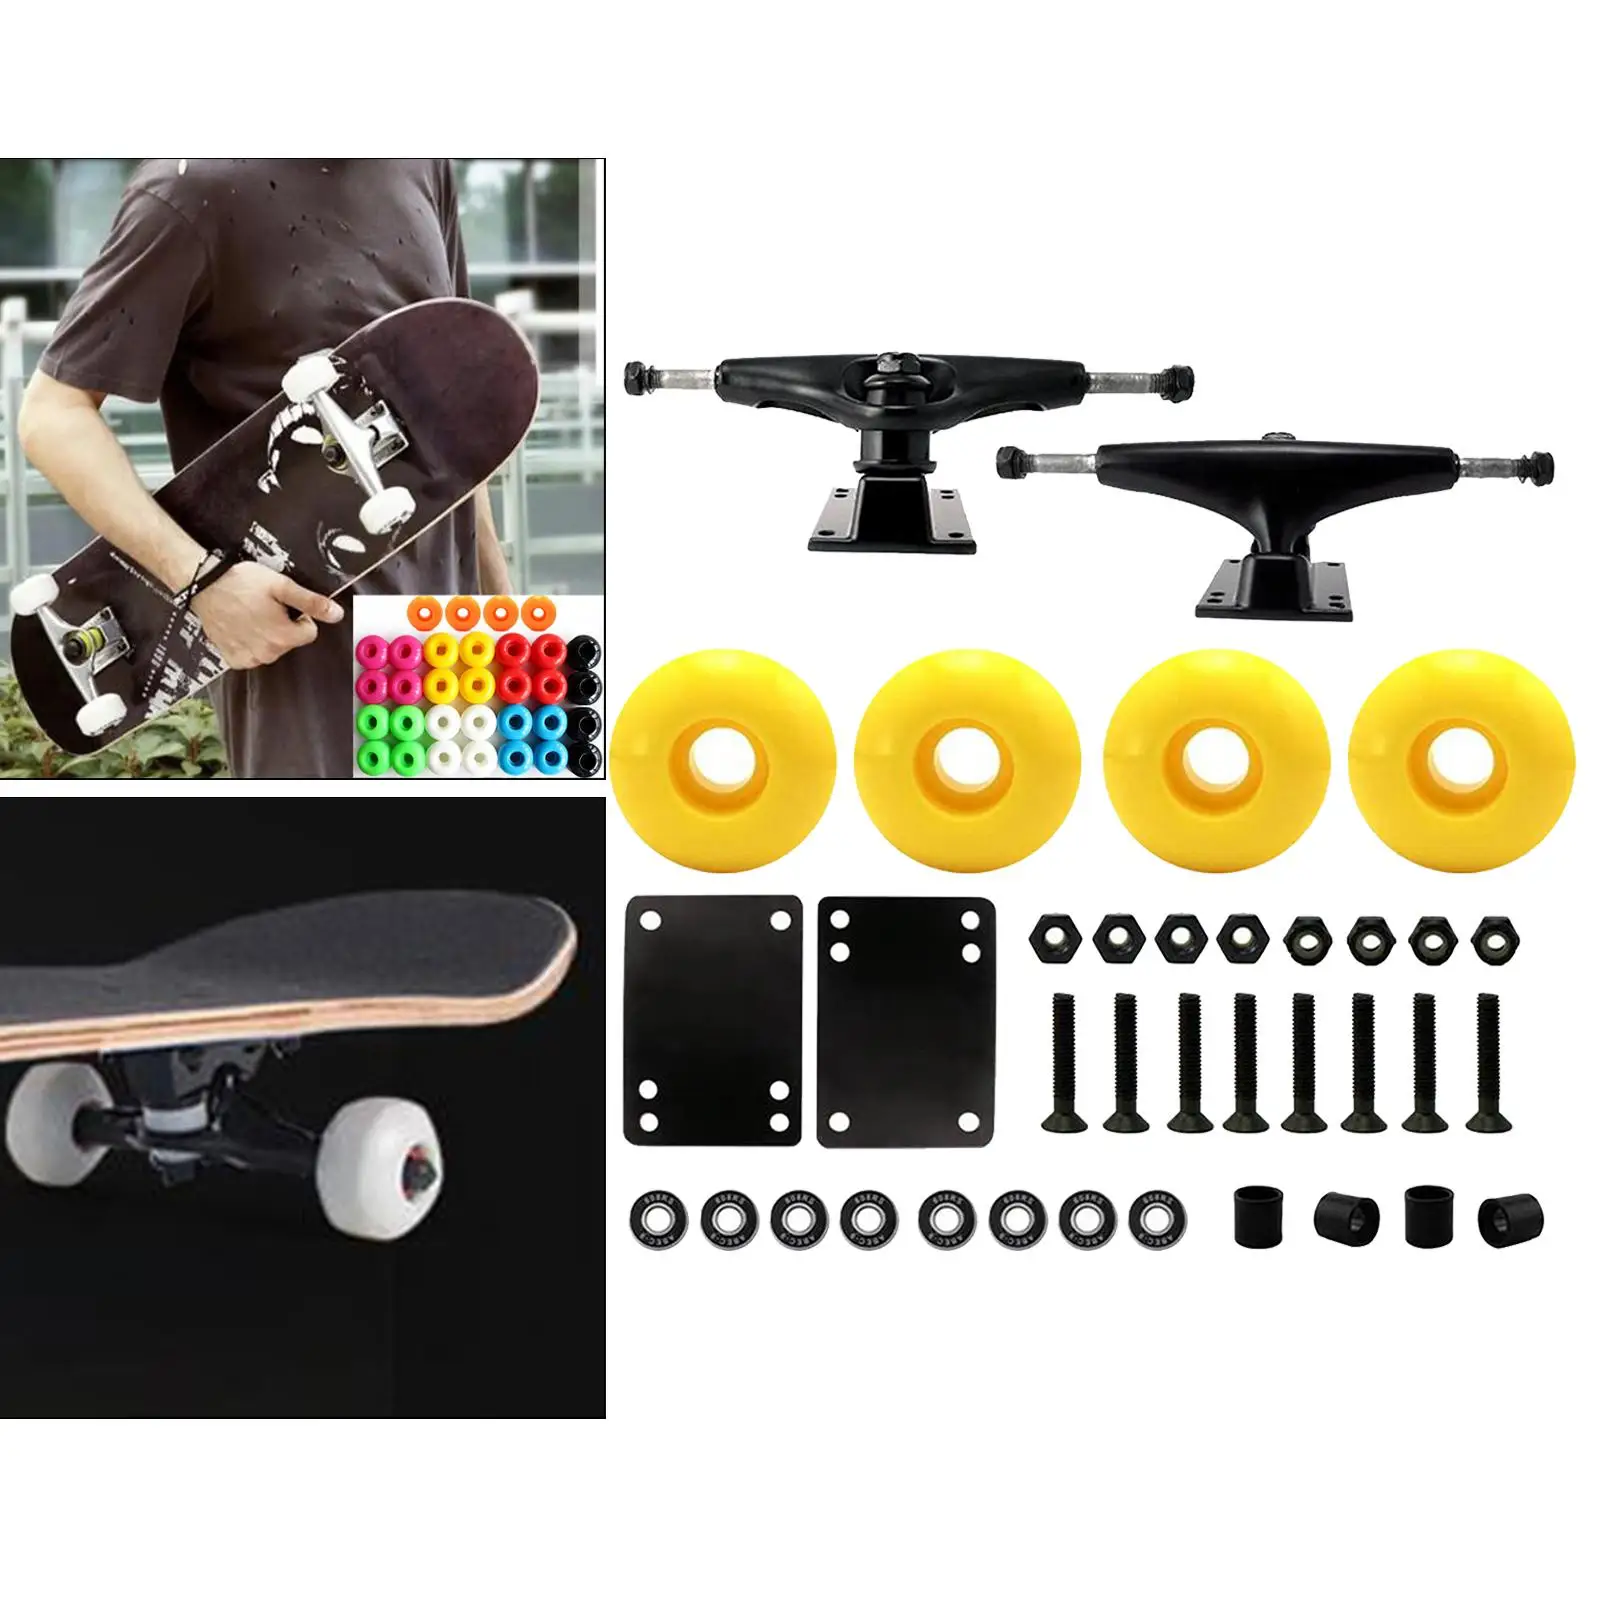 Skateboard Package 5 Inch Trucks with 52mm Wheels + Components, Aluminum Trucks 5A Hardness Bushions and 6-Hole Baseplates